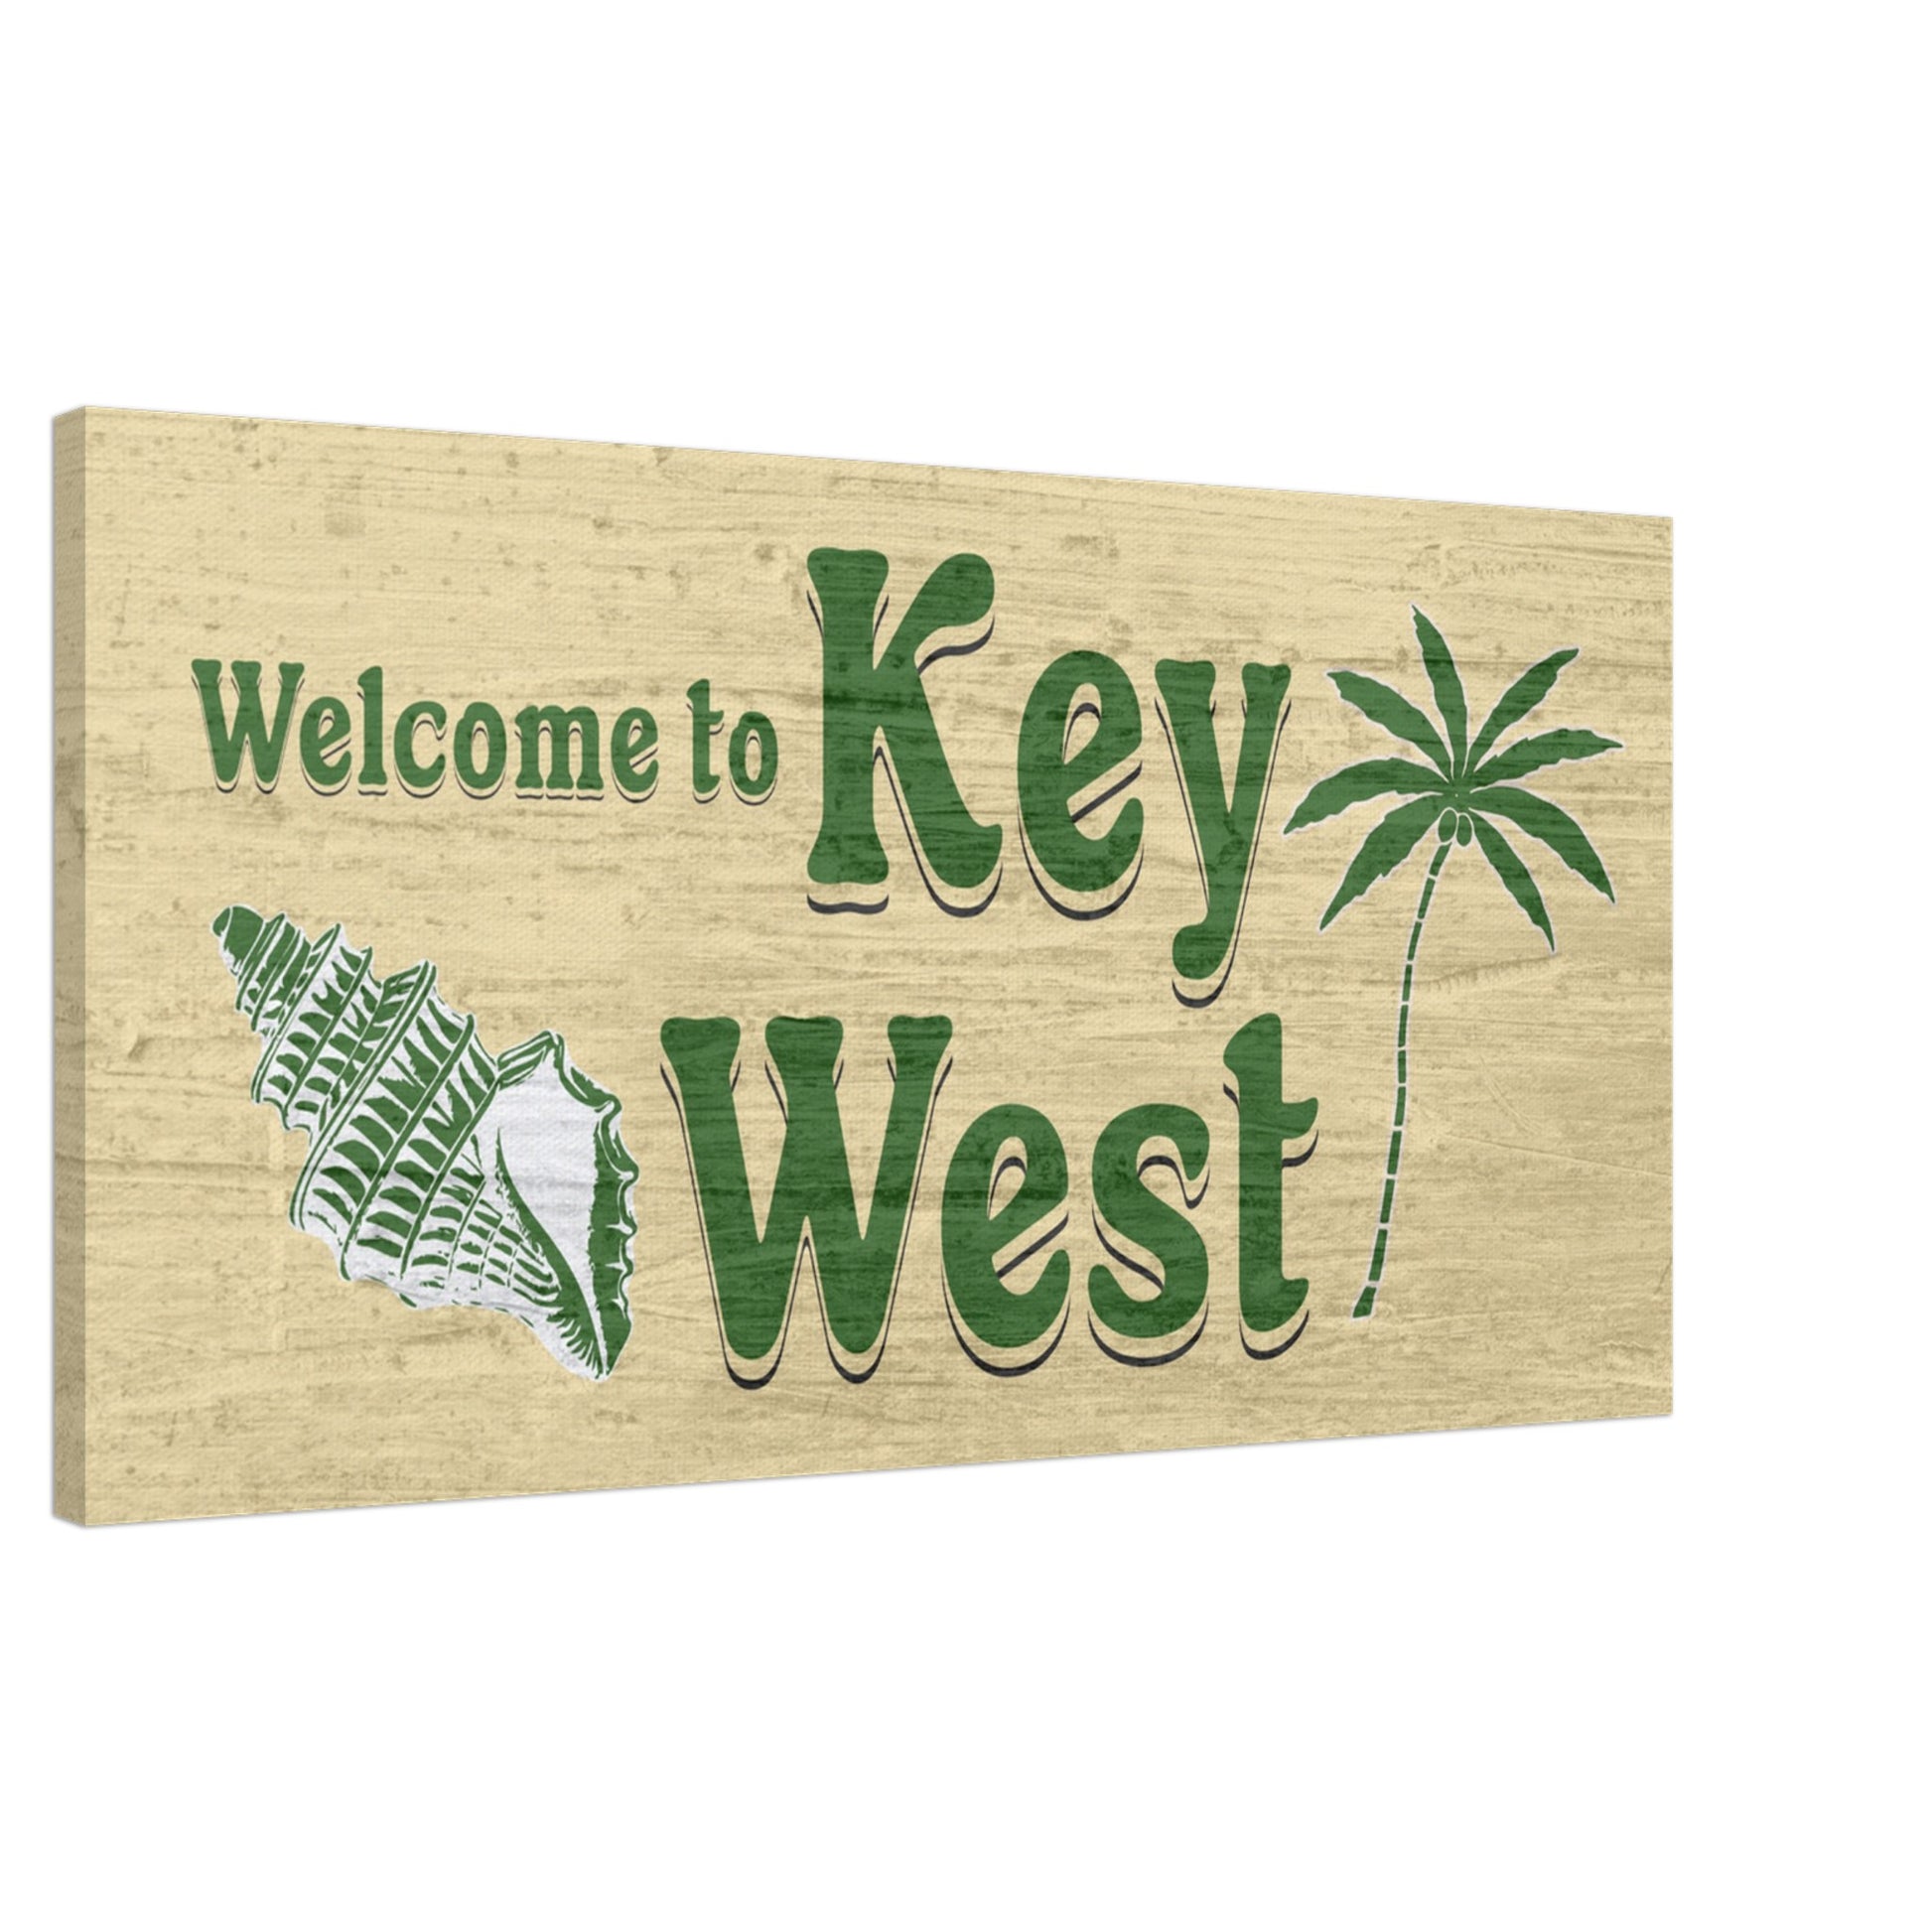 Welcome to Key West Large Canvas Wall Print Caribbean Rays